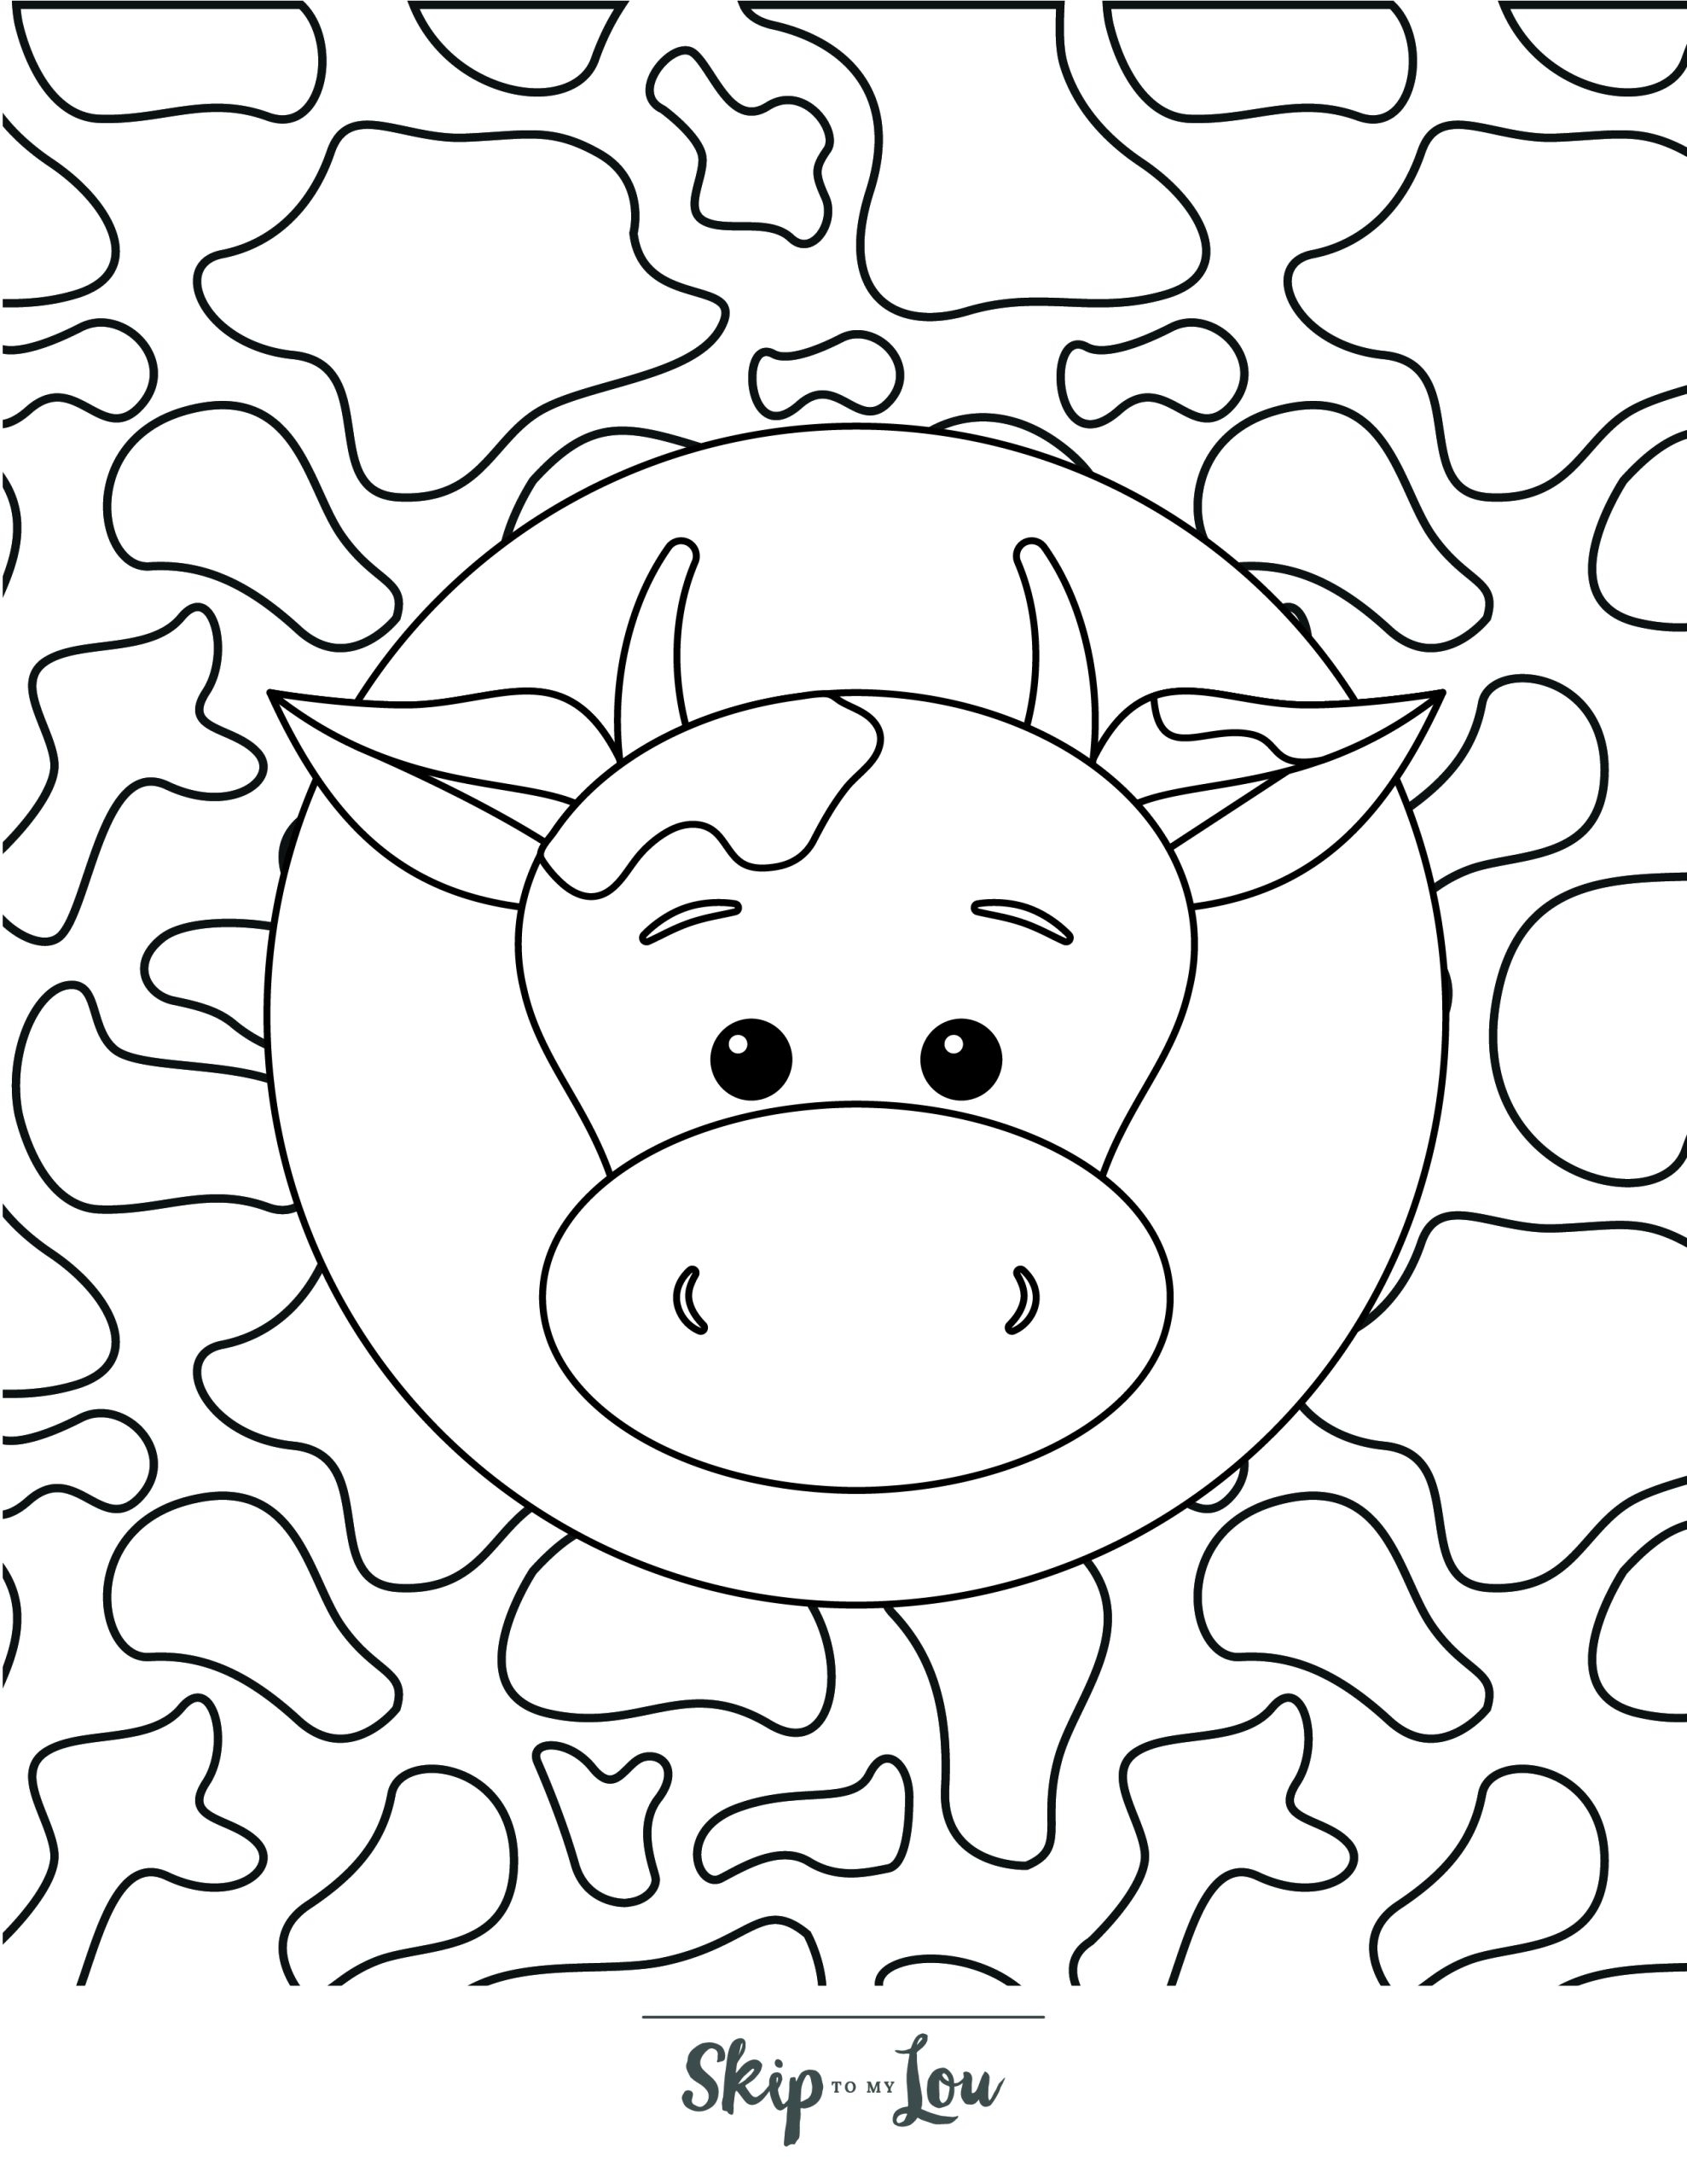 Free Printable Cow Coloring Pages With PDF Download Skip To My Lou - Coloring Pages of Cows Free Printable